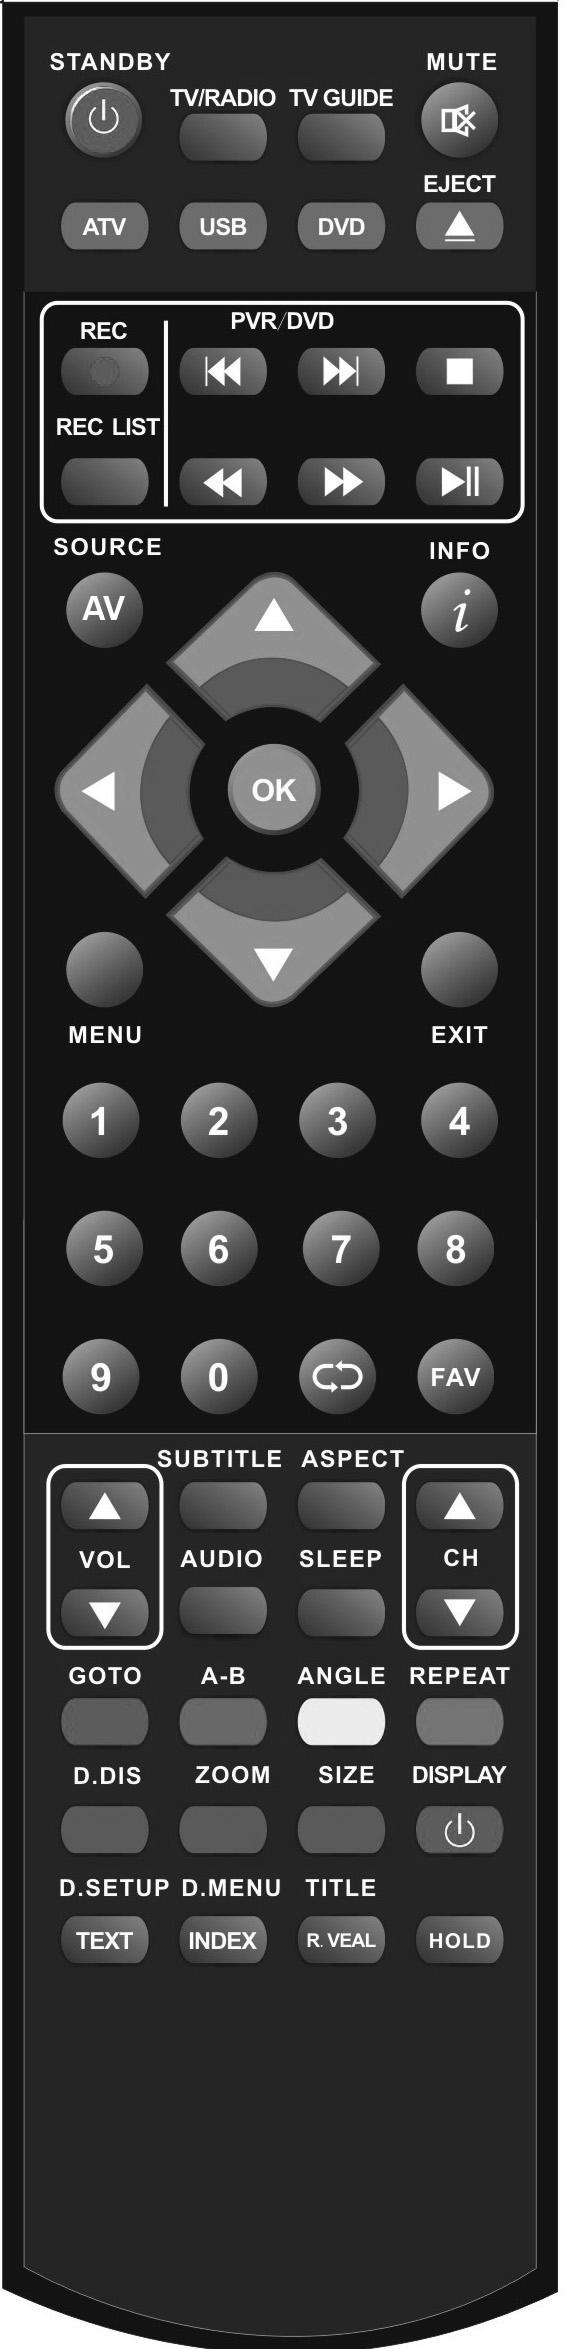 Remote Control REMOTE CONTROL 1 1 2 3 4 5 STANDBY - Switch on TV when in standby or vice versa MUTE - Mute the sound or vice versa TV/RADIO - Switch to Freeview and switch between TV and radio in